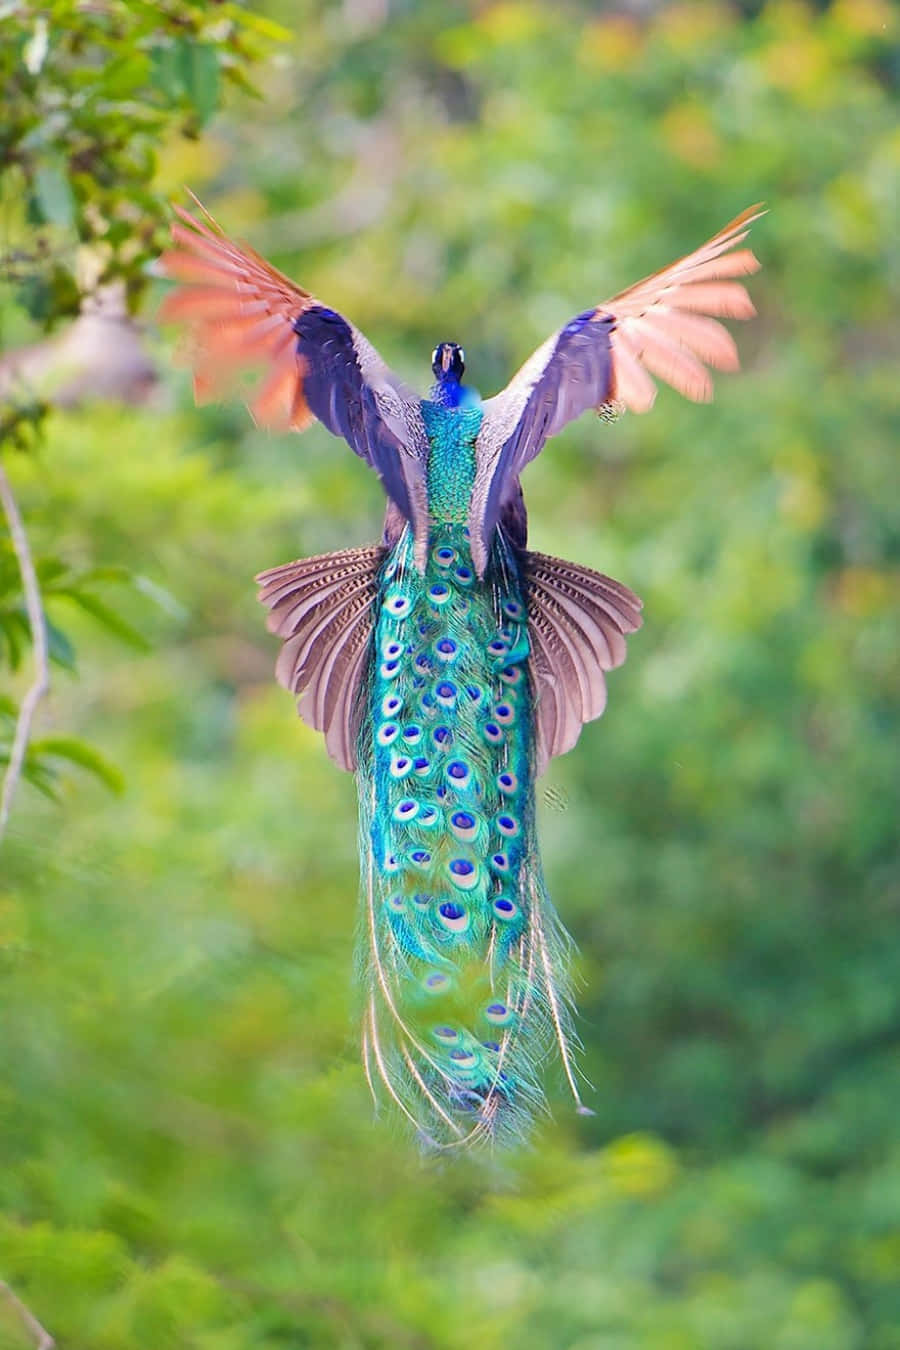 The brilliant colors of a peacock bird